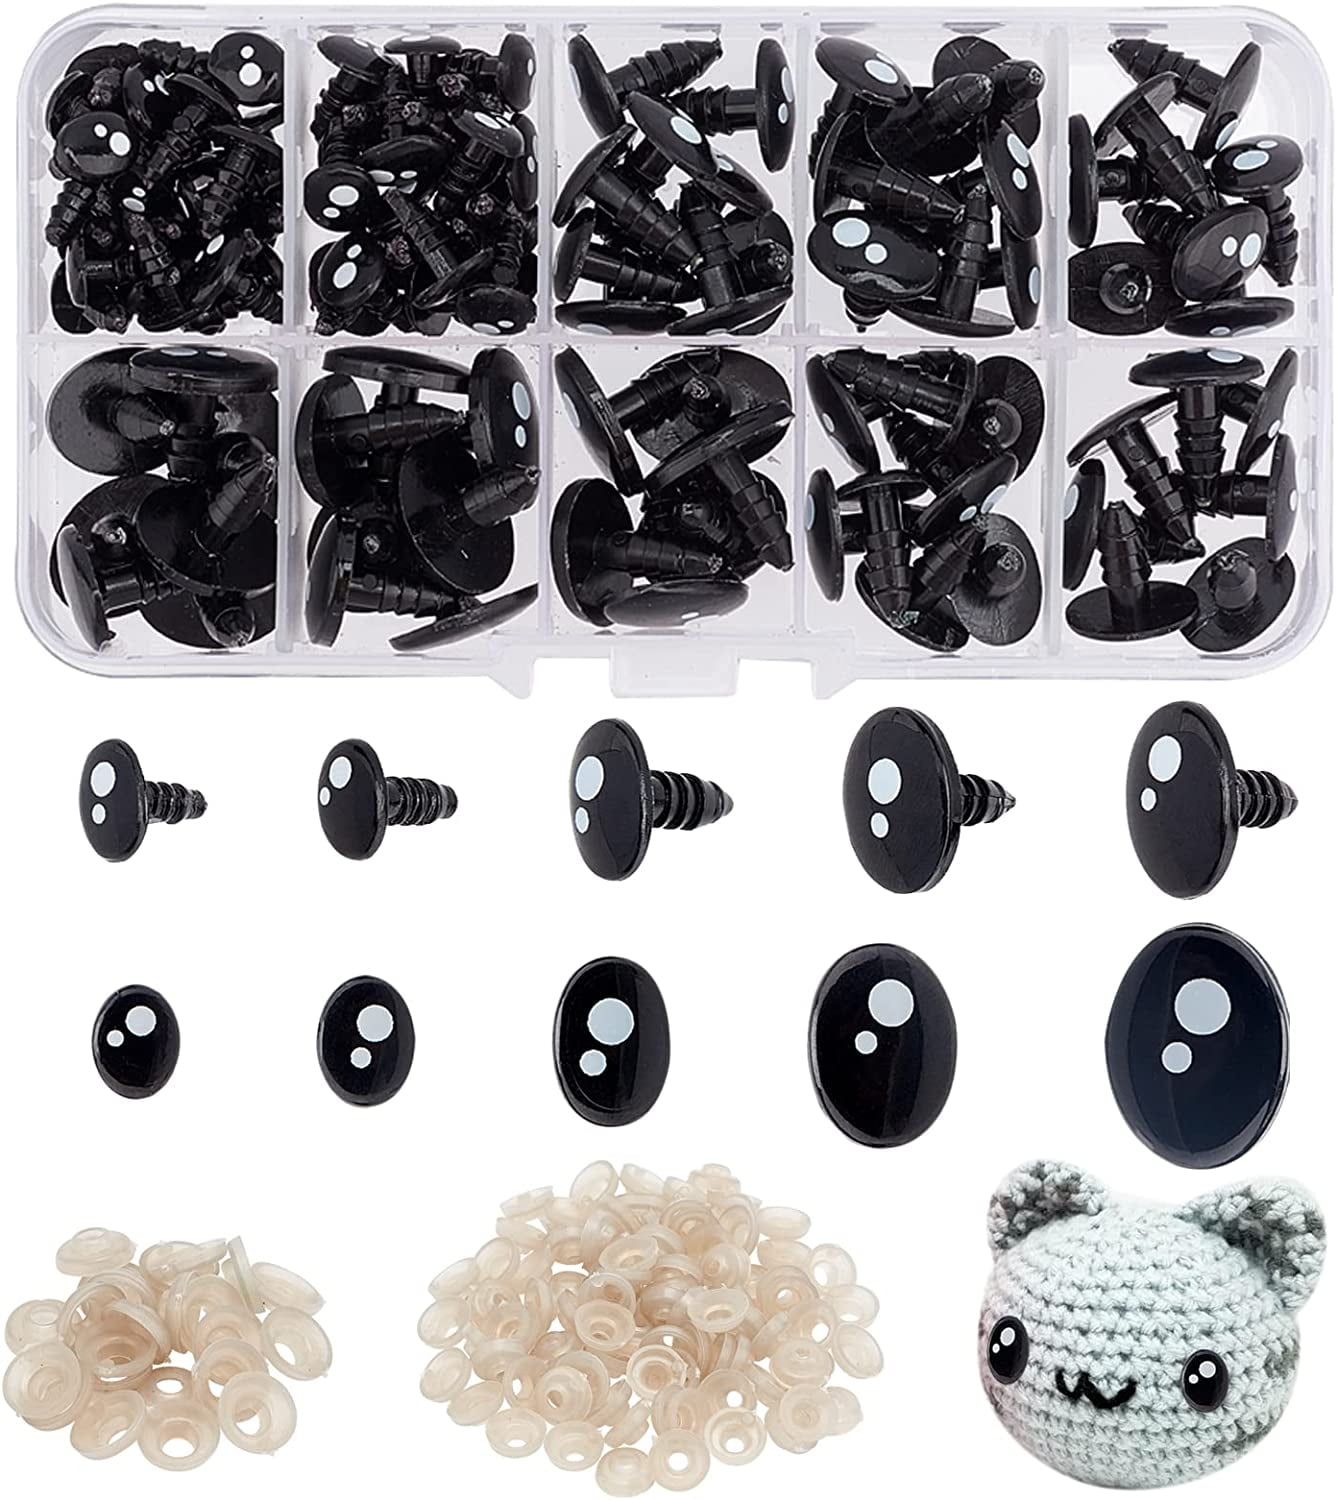 EuCarlos Plastic Safety Eyes for Amigurumi, 120PCS 6mm - 14mm Black Solid  Craft Doll Eyes for Crafts, Crochet Toy and Stuffed Animals